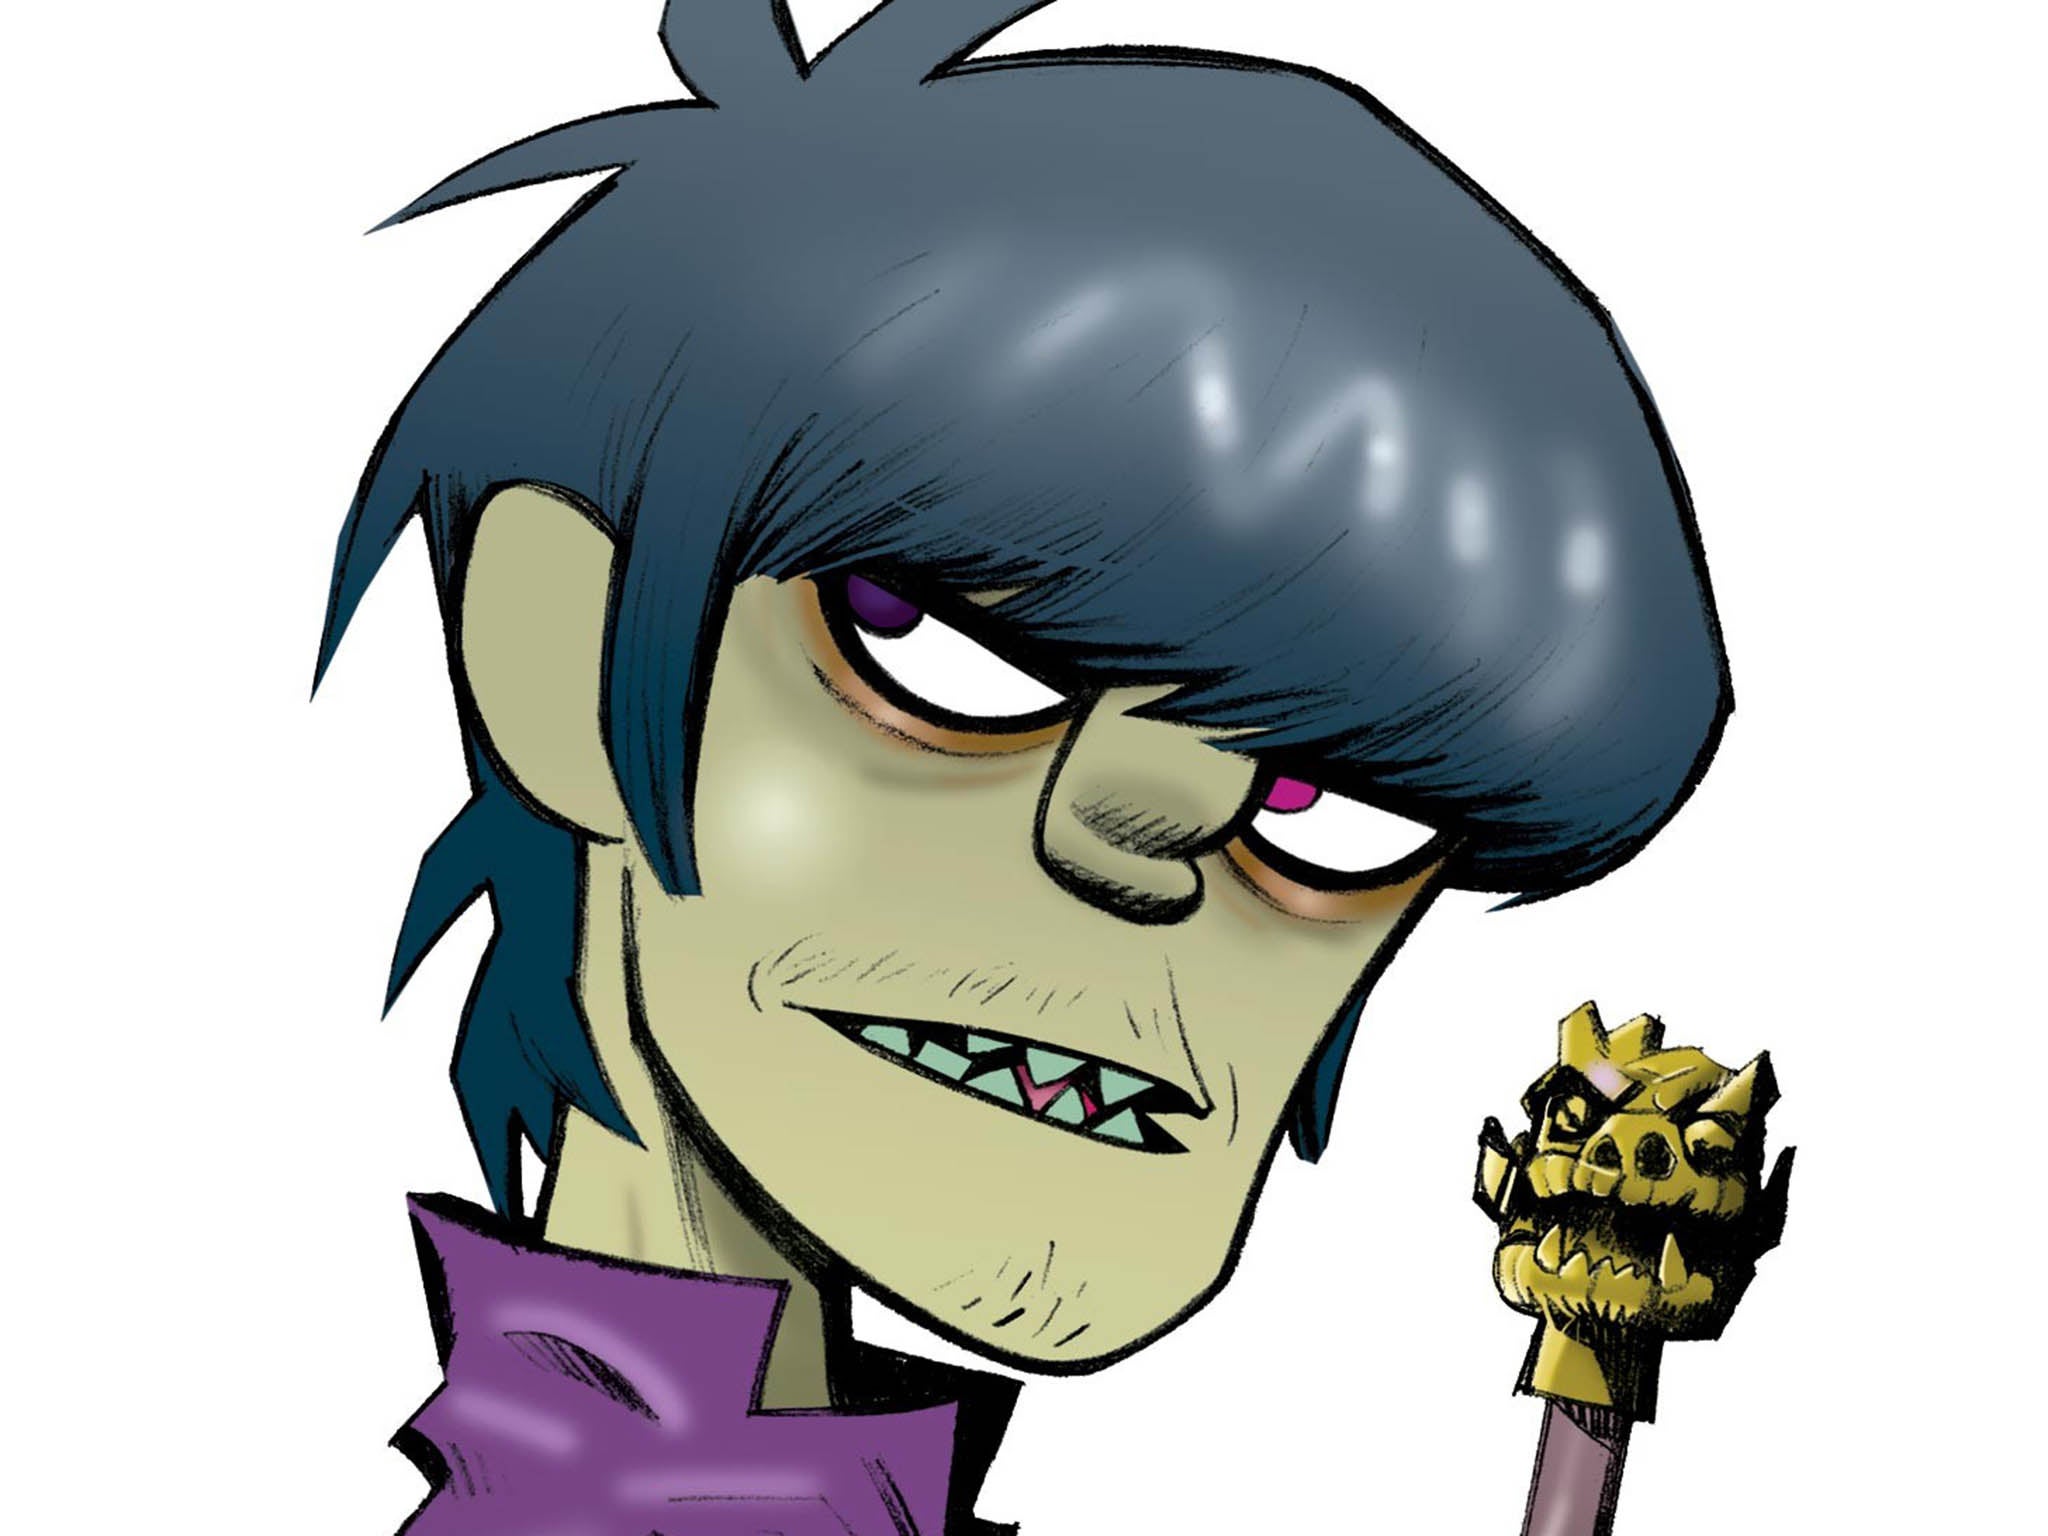 One of the fictional Gorillaz characters